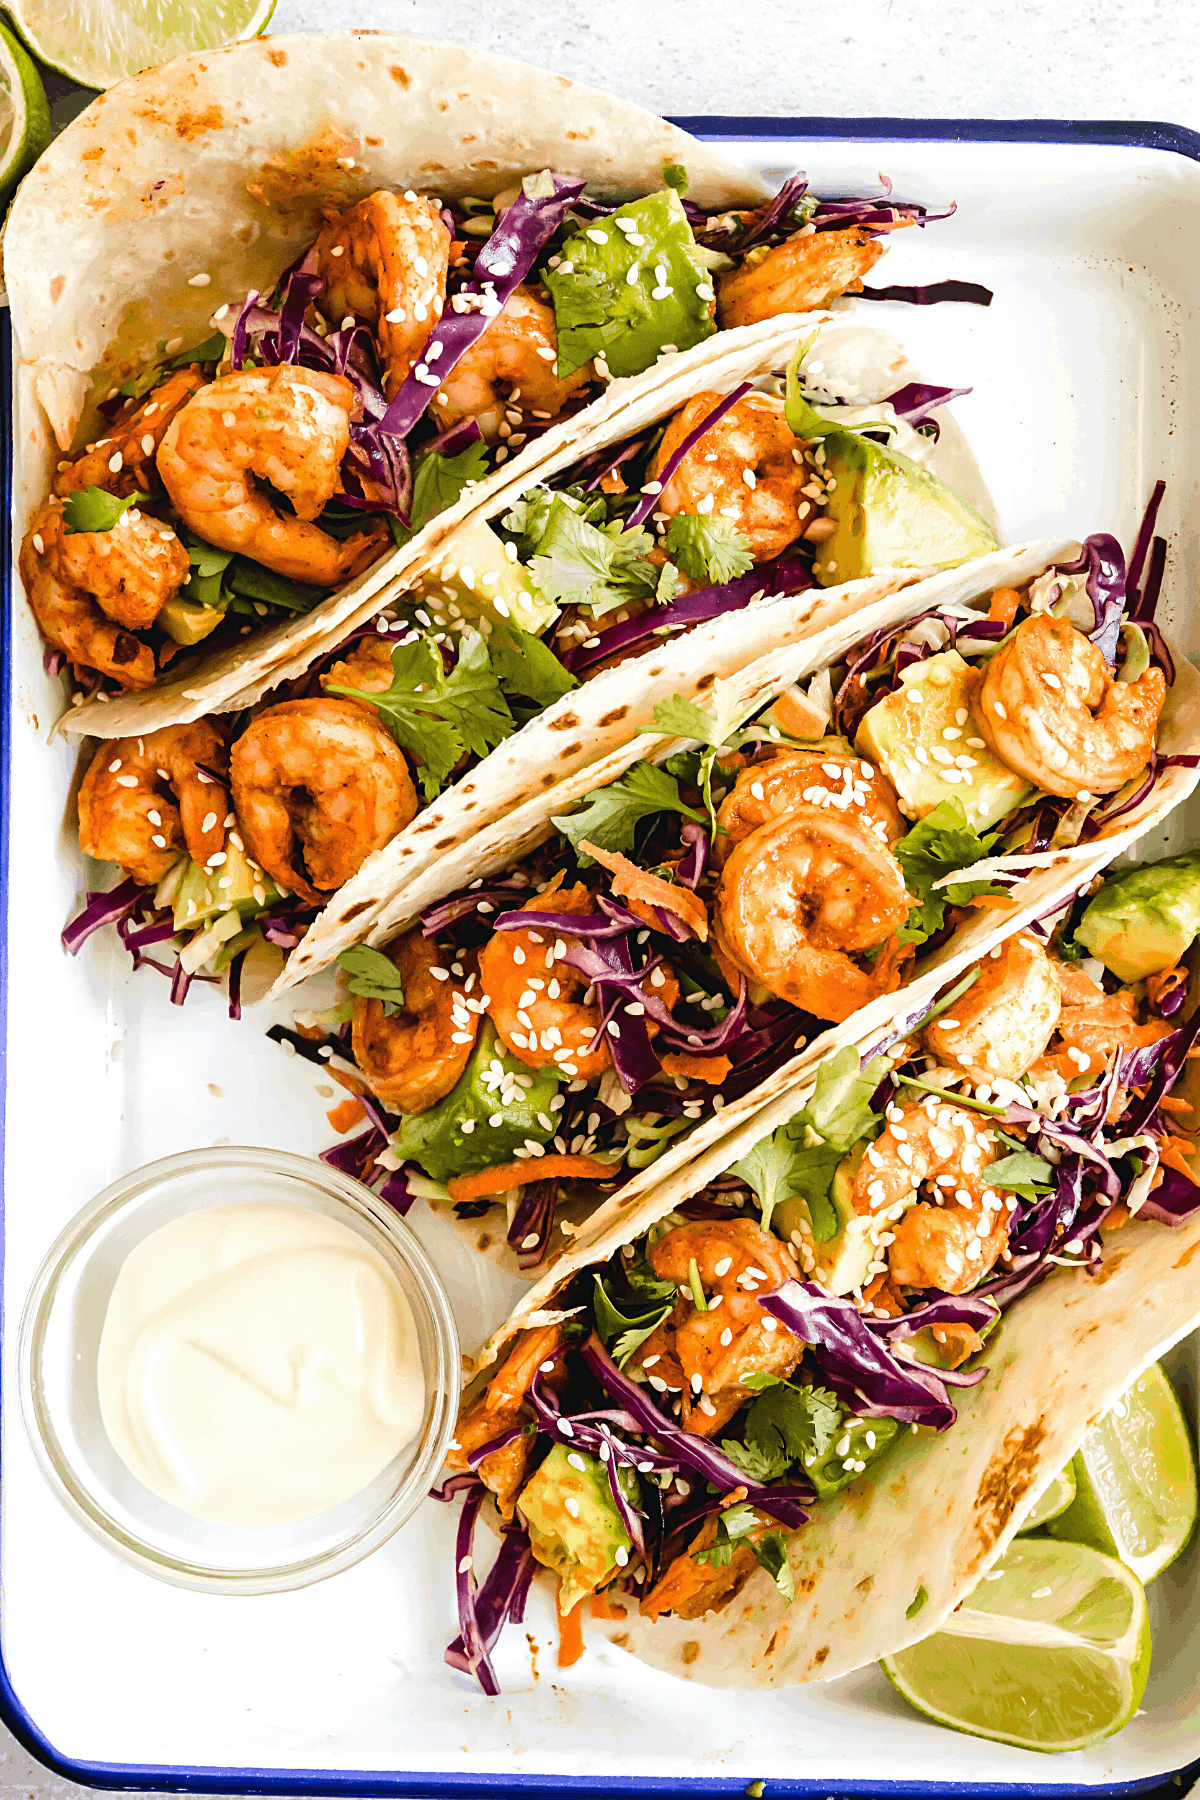 Hearty u0026 Delicious Shrimp Tacos with a Crunchy Asian Cabbage Slaw